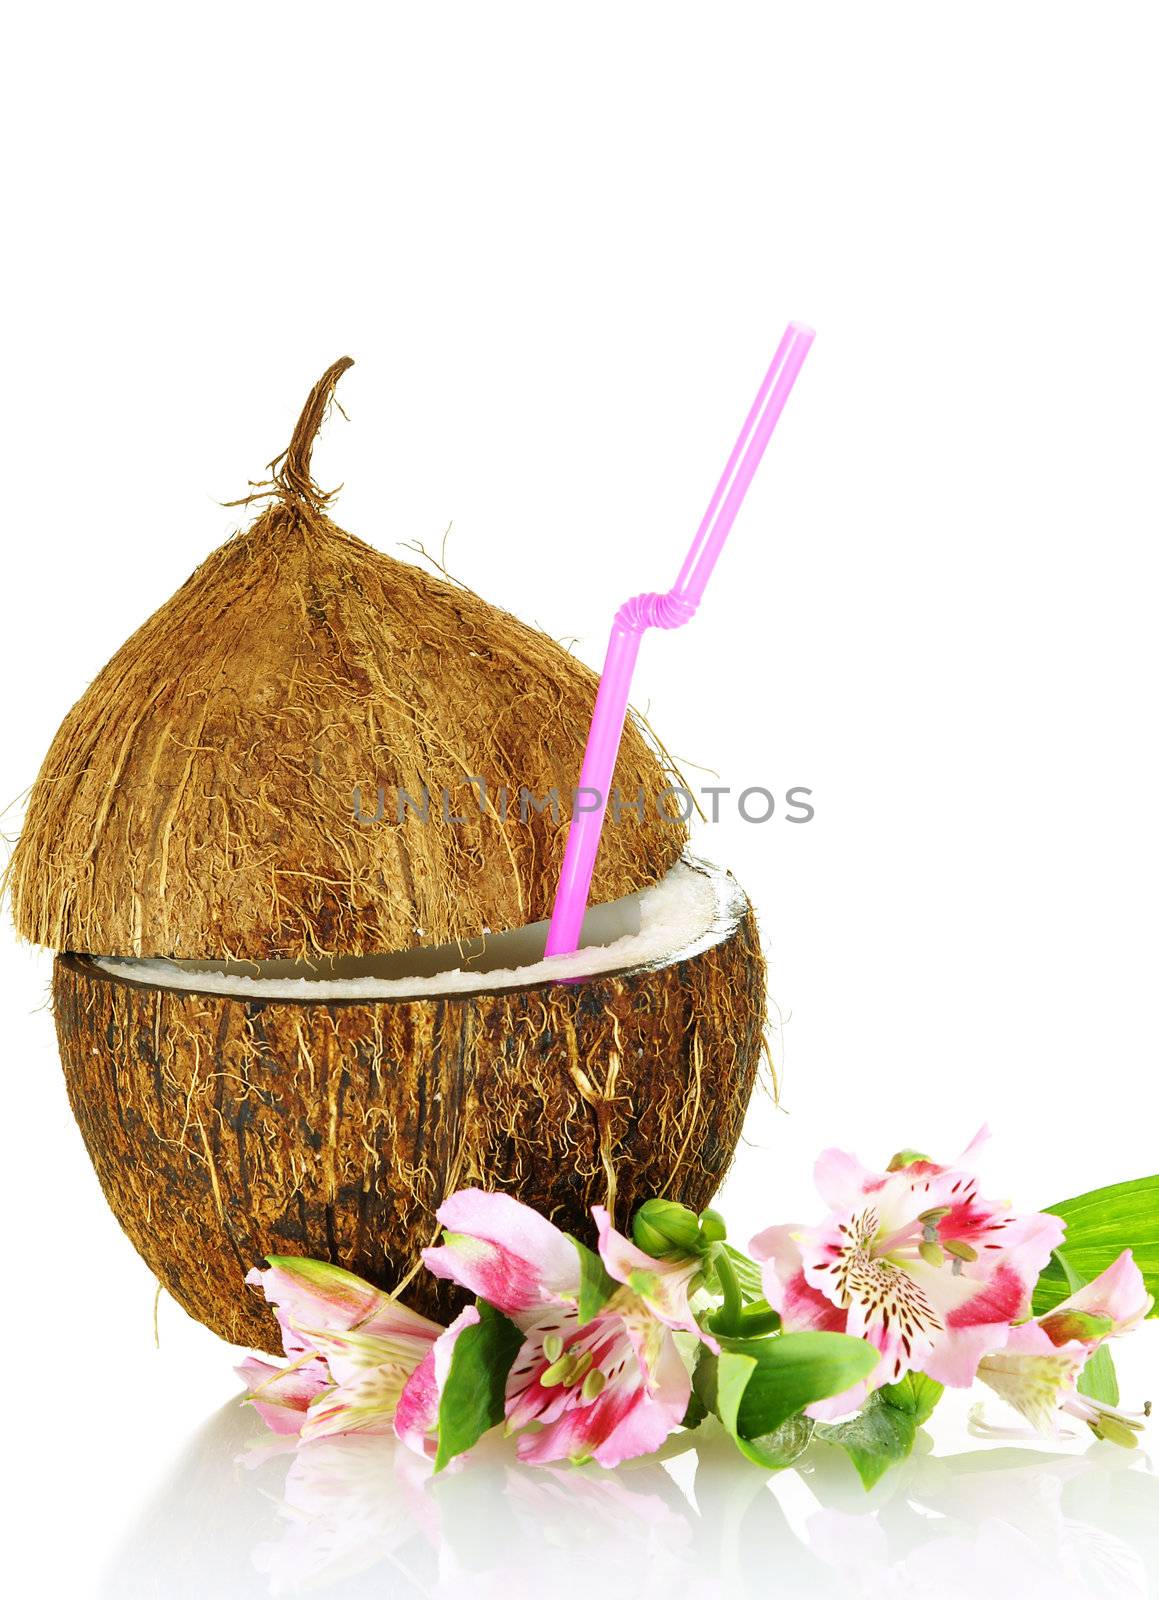 coconut stylized as glass for coctail with flowers over white